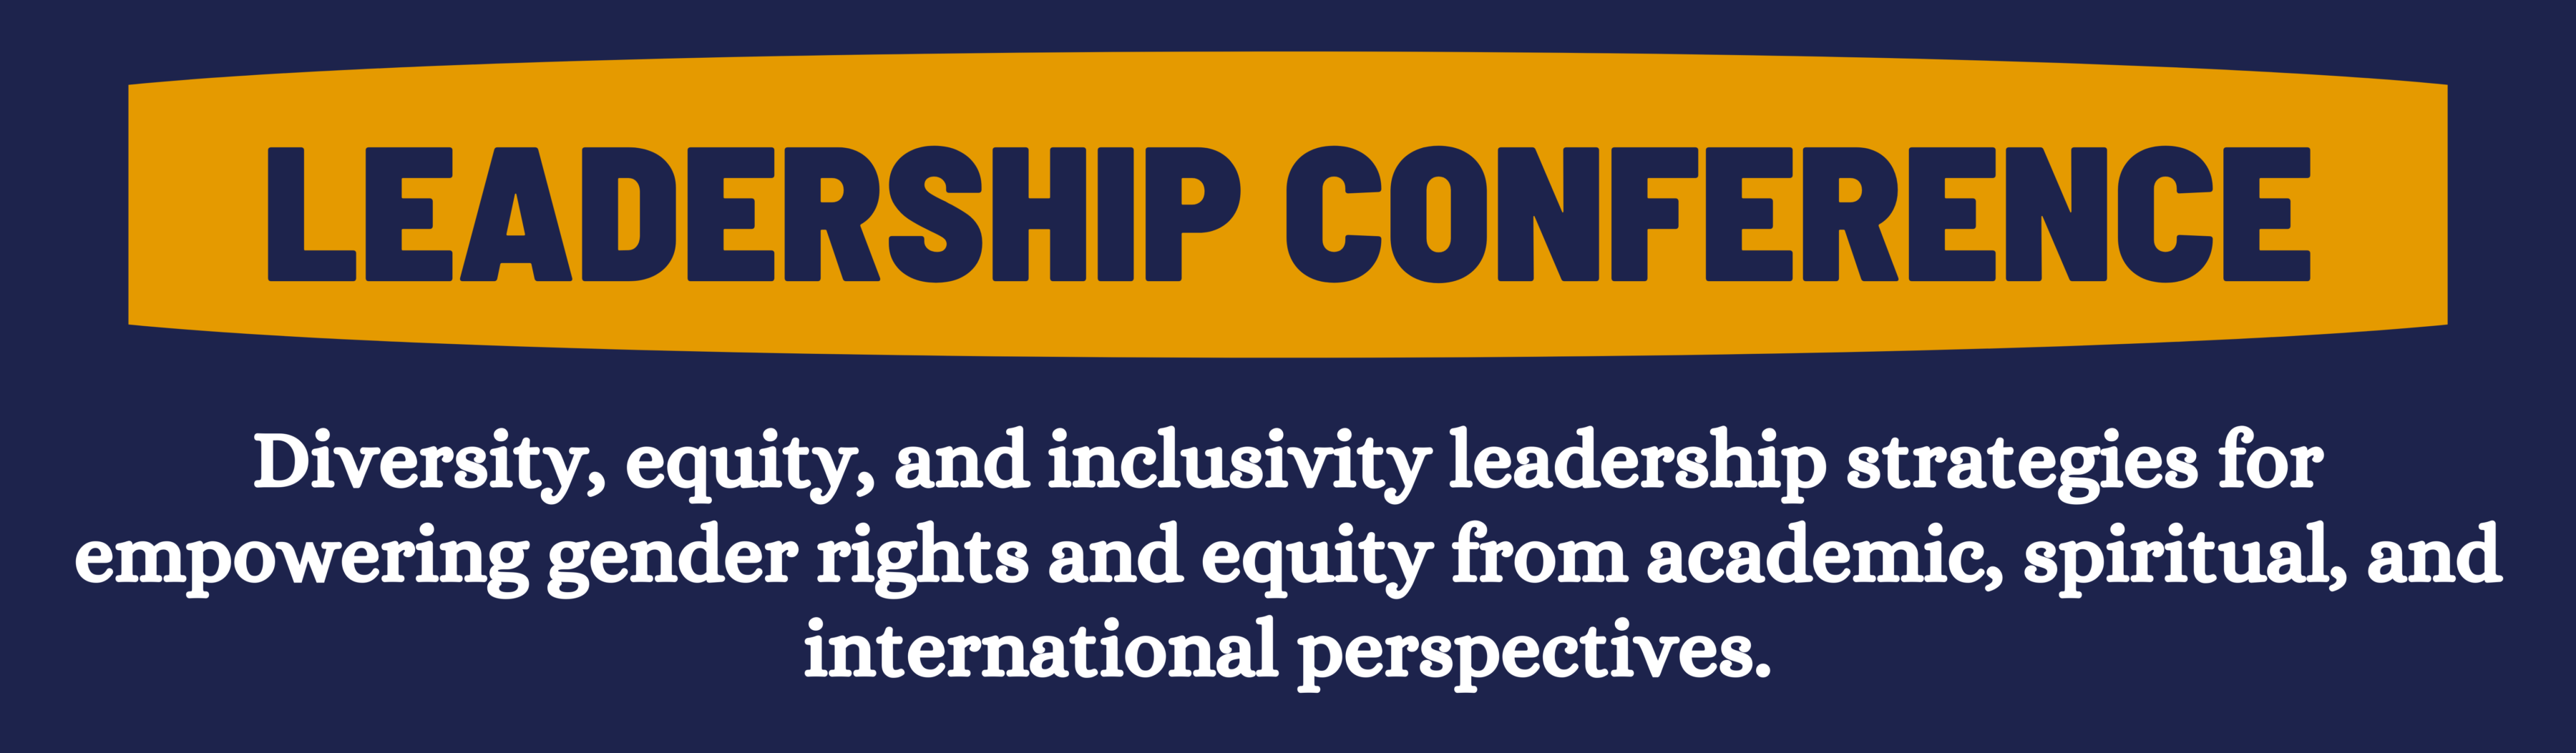 Diversity, equity, and inclusivity leadership strategies for empowering gender rights and equity from academic, spiritual, and international perspectives.